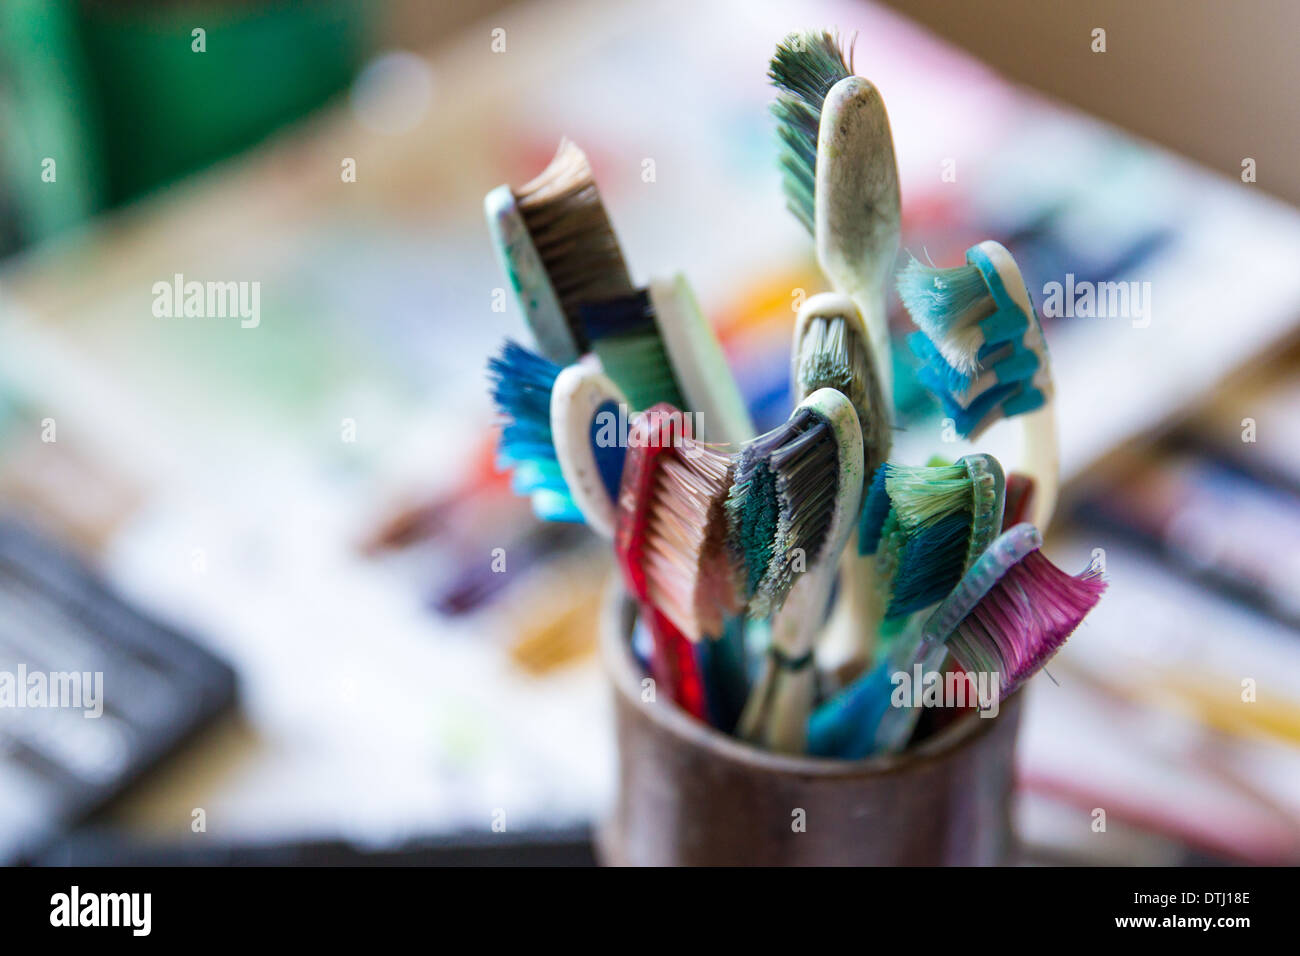 Toothbrushes used for painting Stock Photo